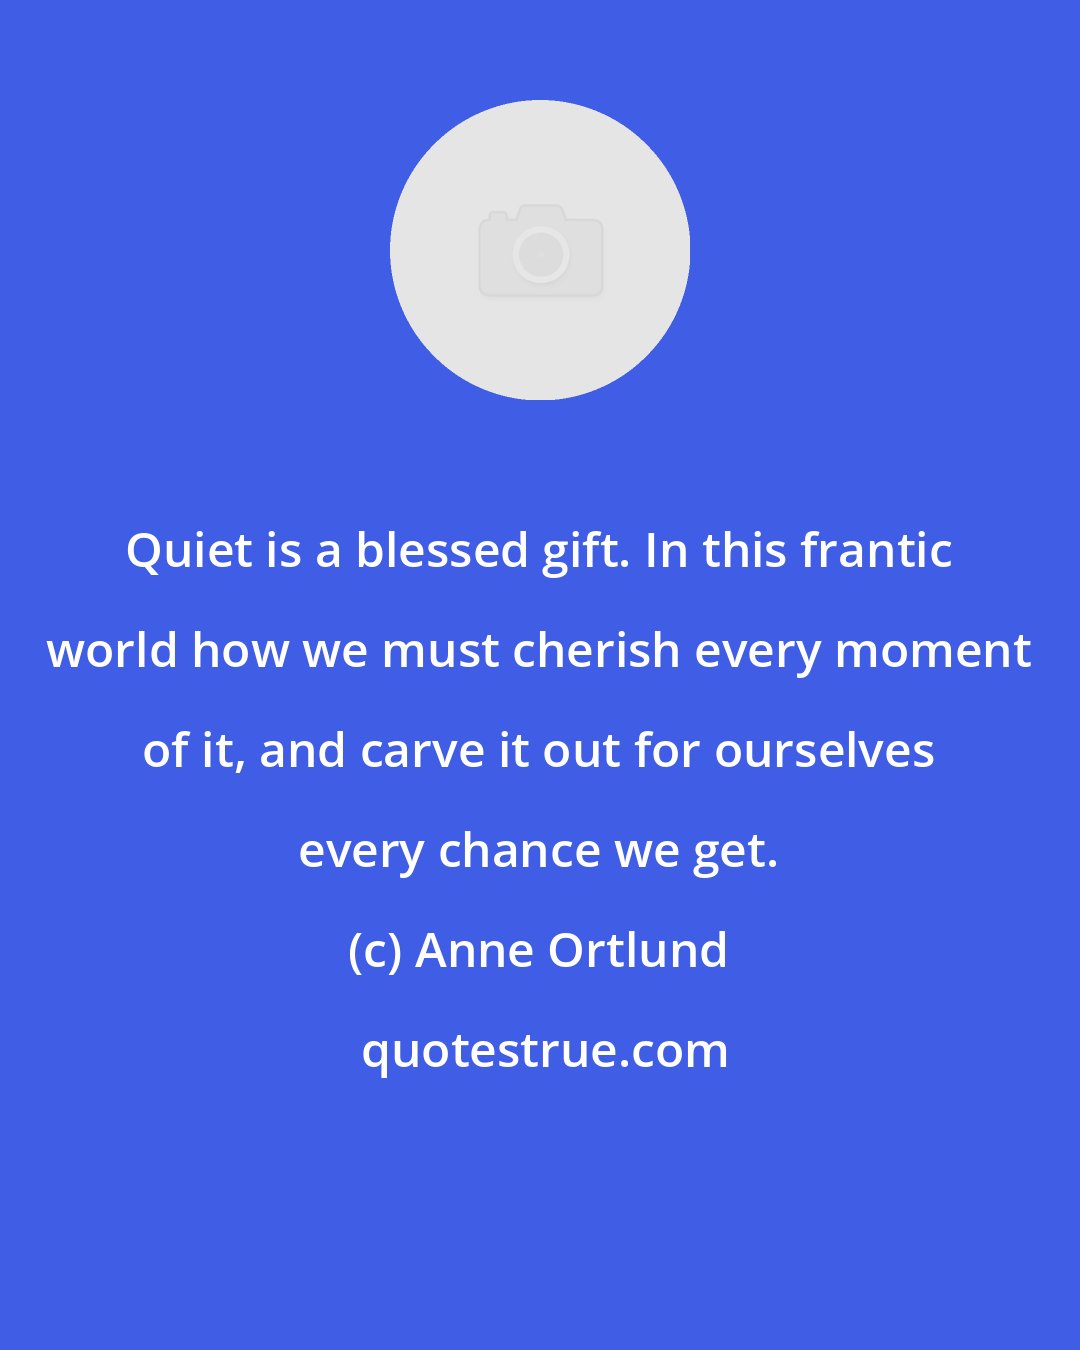 Anne Ortlund: Quiet is a blessed gift. In this frantic world how we must cherish every moment of it, and carve it out for ourselves every chance we get.